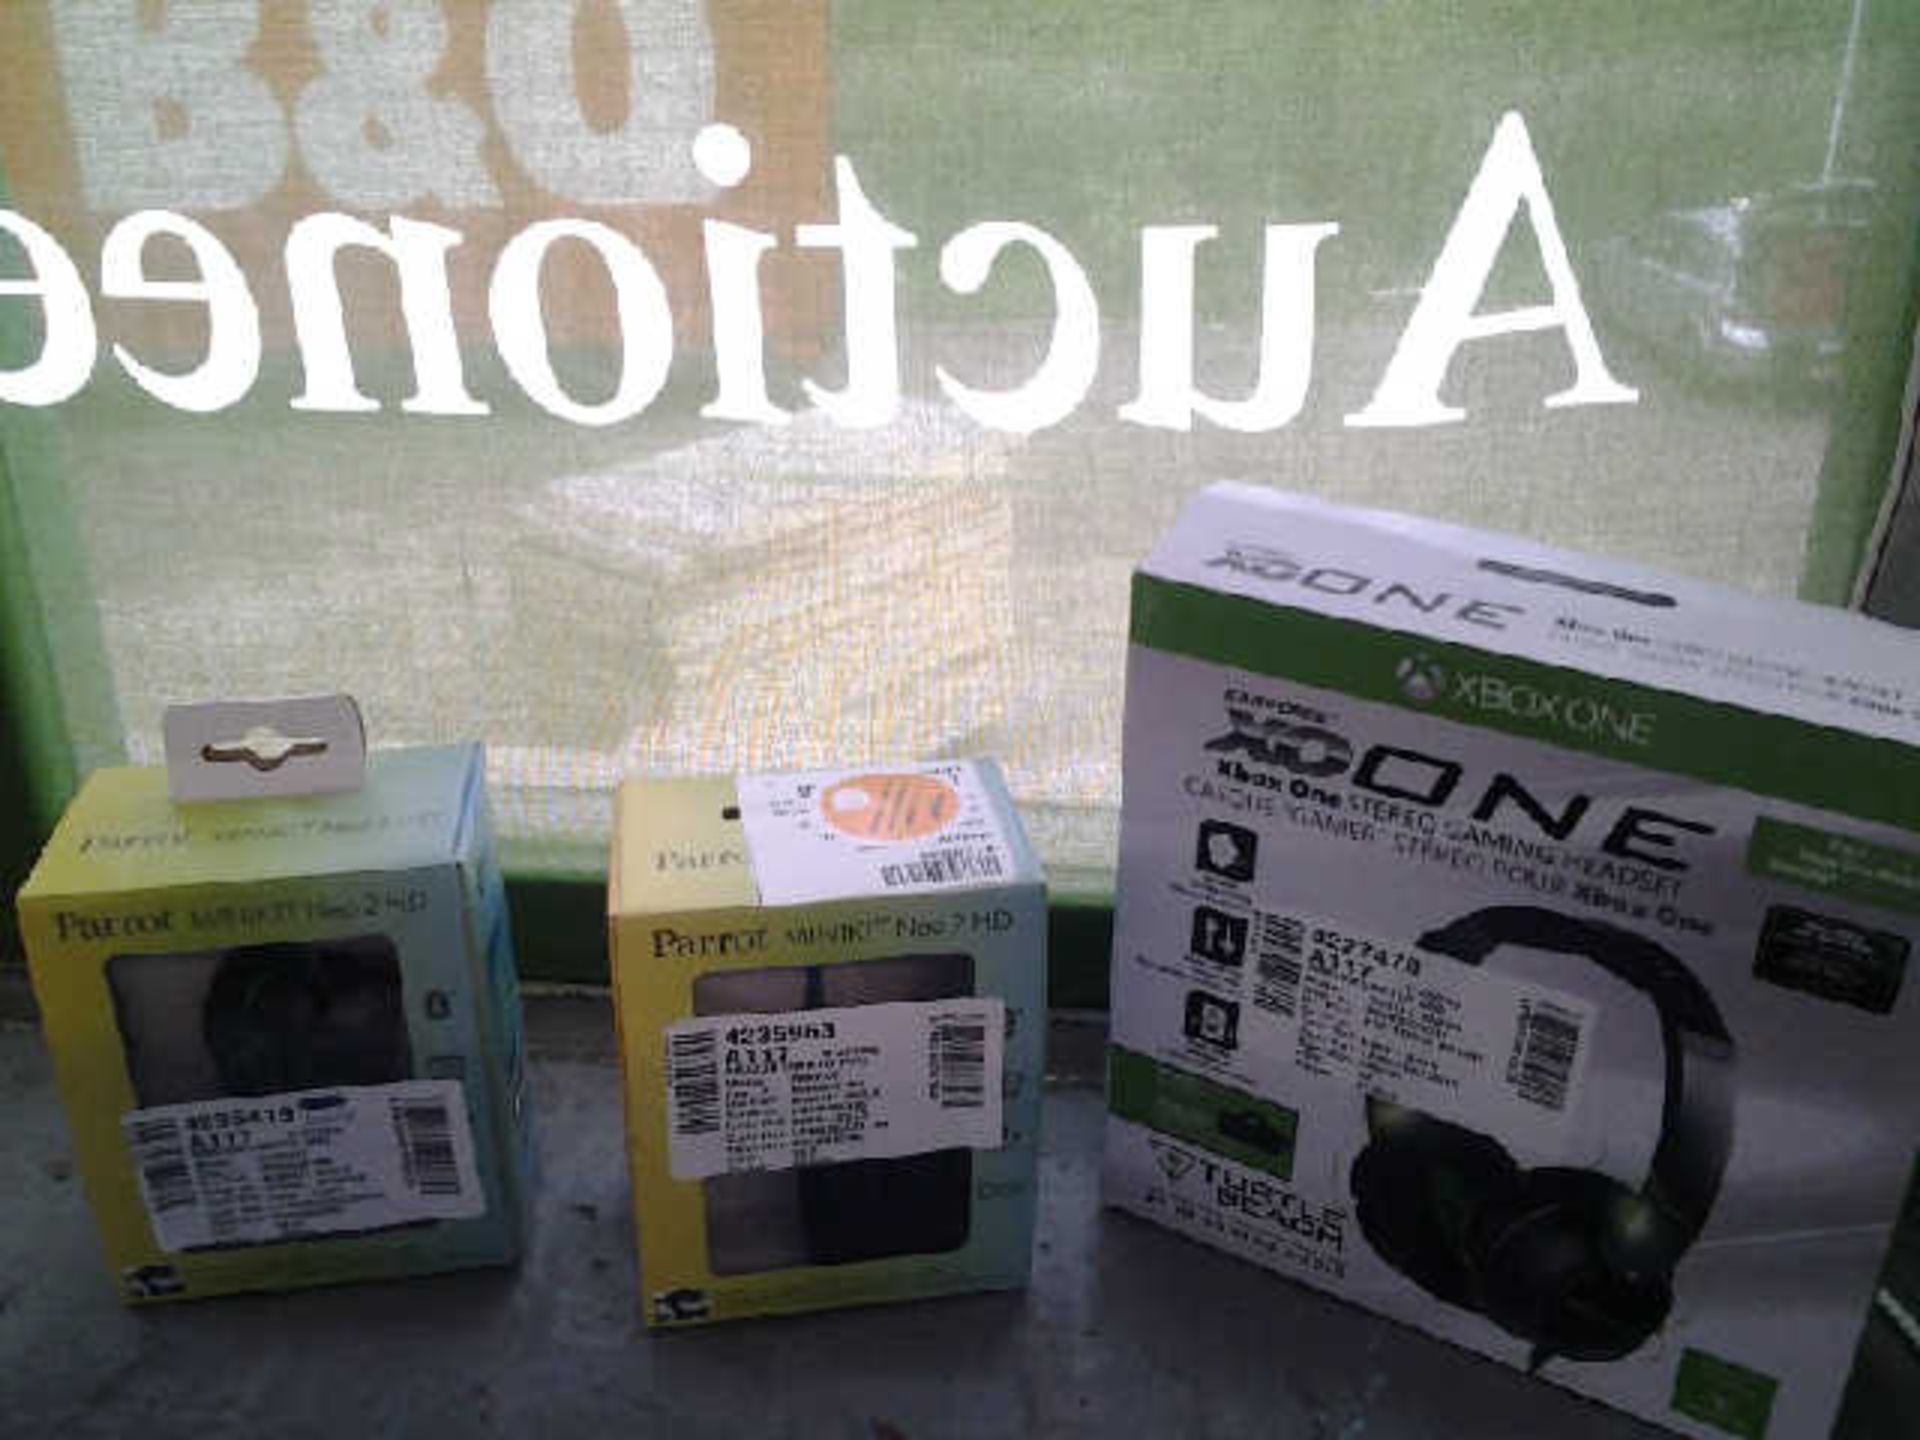 APPROX 3 ITEMS INCLUDING XBOX ONE TURTLEBEACH EARFORCE HEADPHONES AND 2 X PARROT MINIKIT NEO 2 HD... - Image 2 of 3